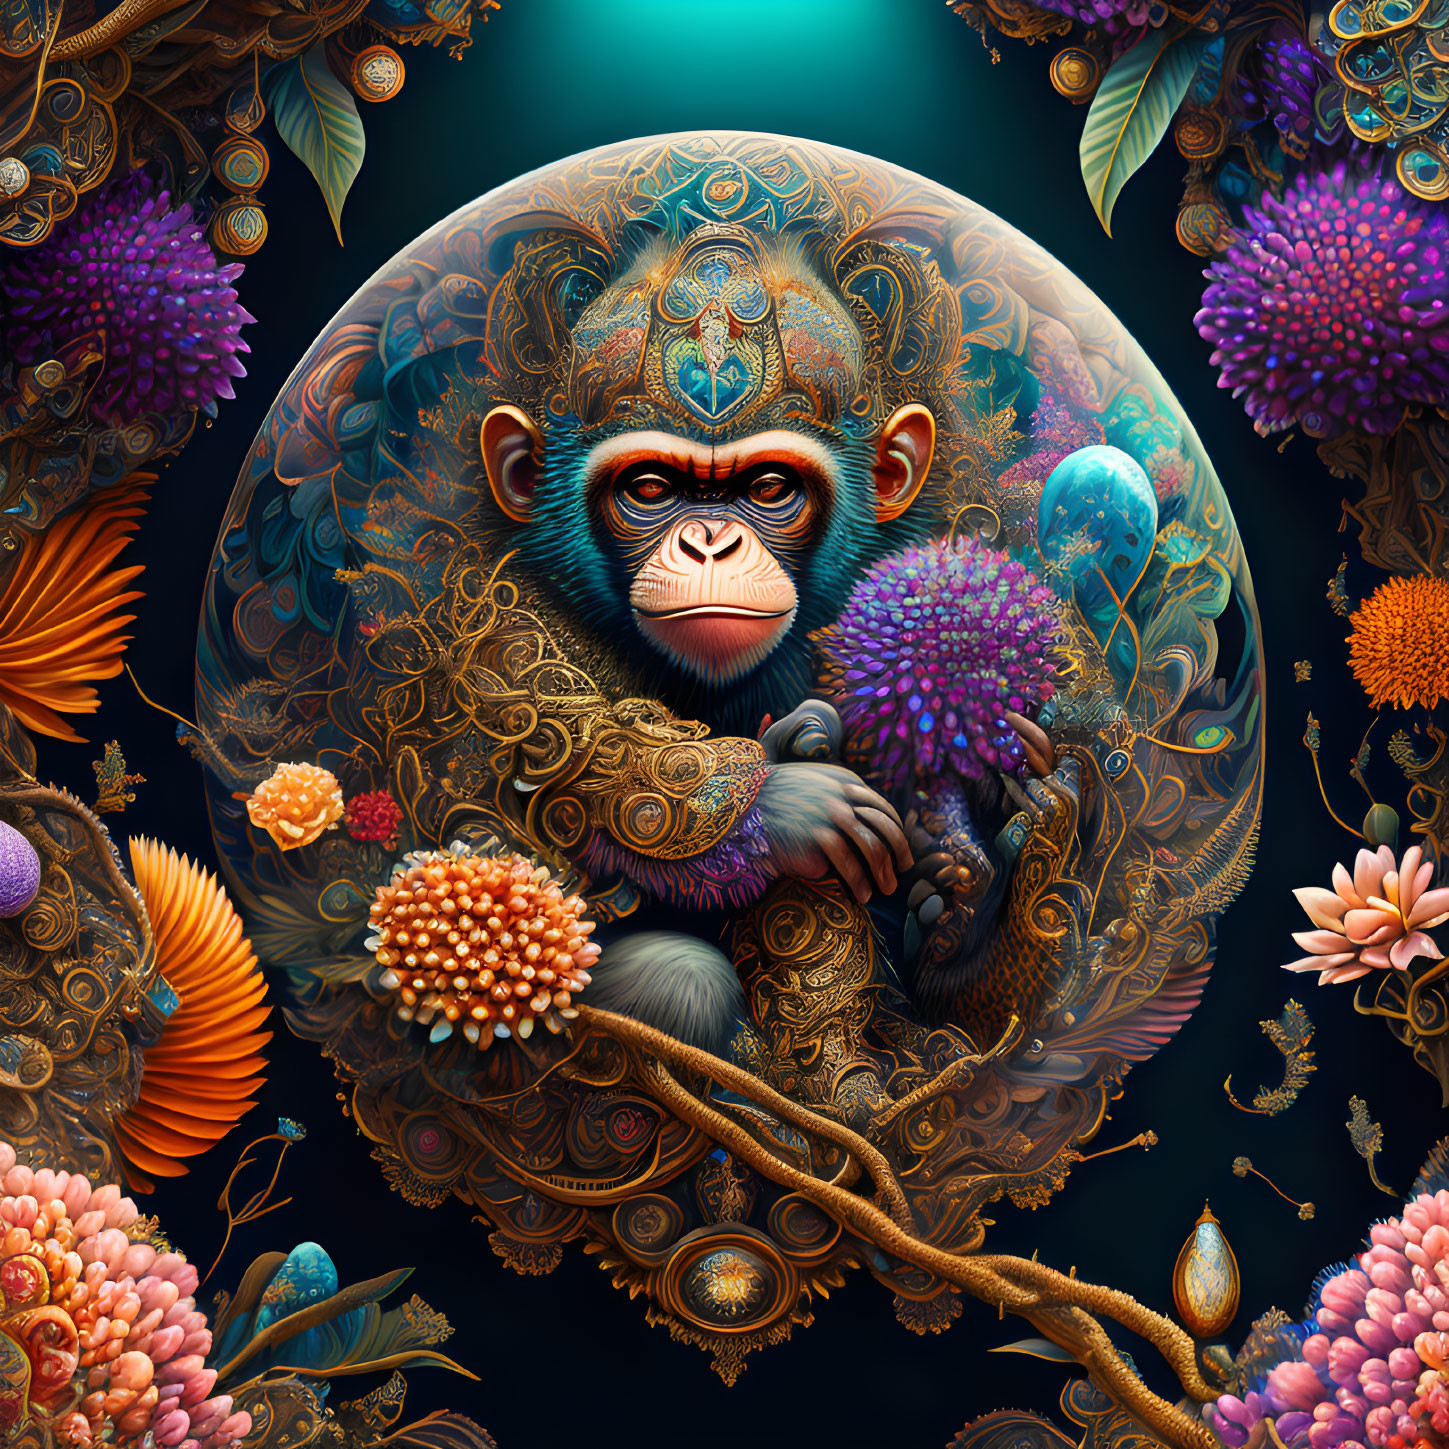 Colorful Illustration of Intricate Monkey in Lush Floral Environment